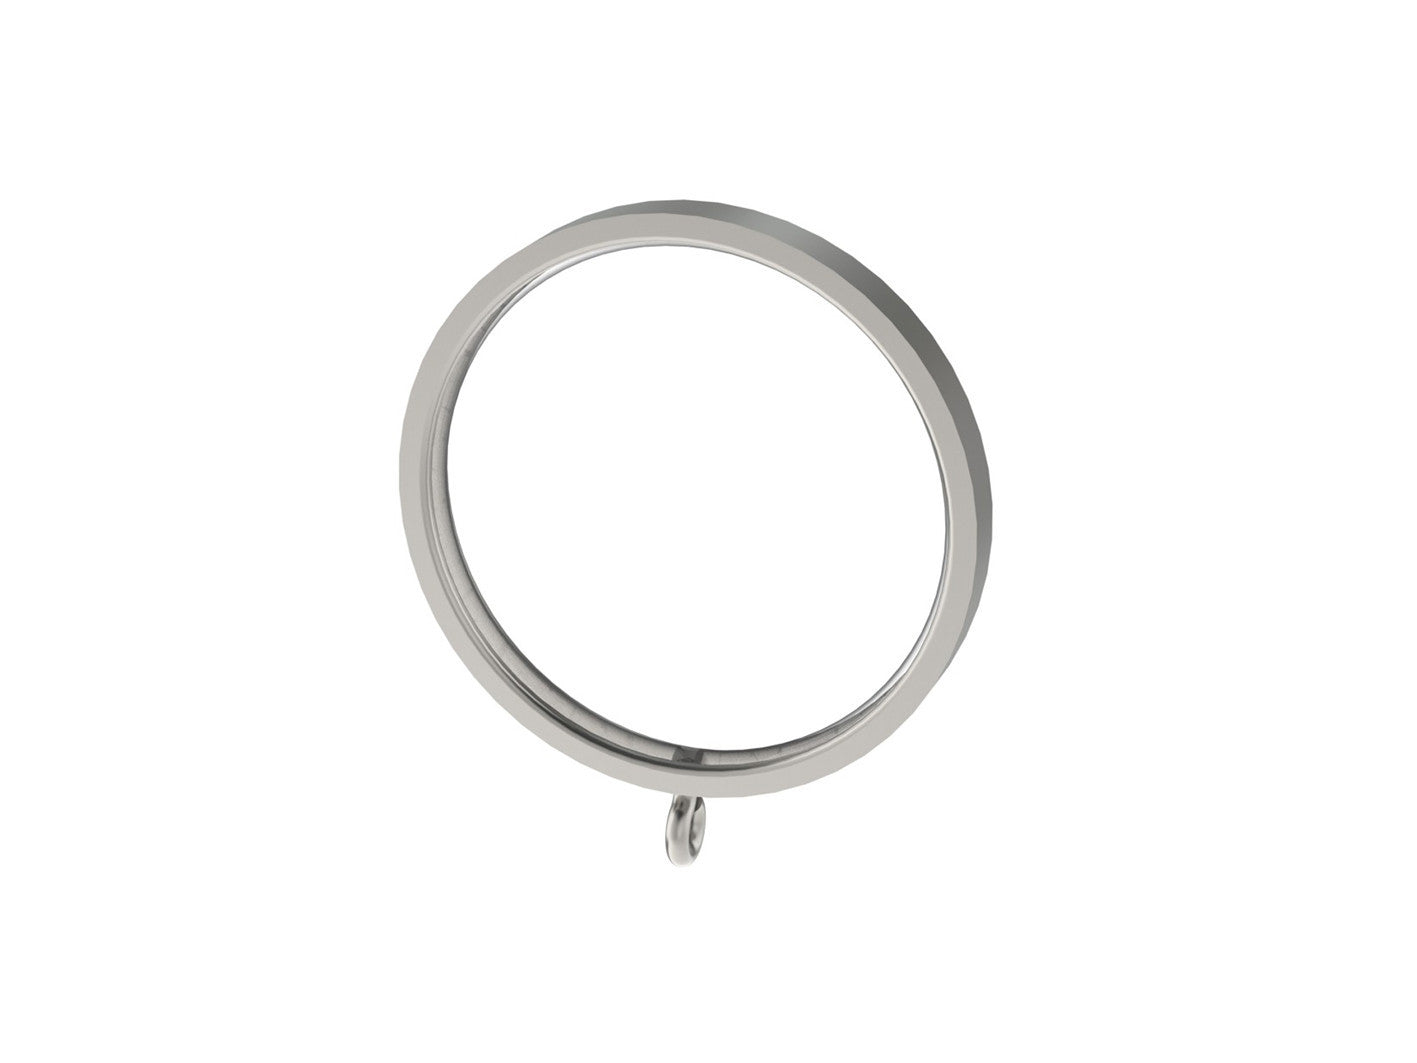 Stainless steel 50mm flat section curtain ring for 50mm steel or wooden curtain pole